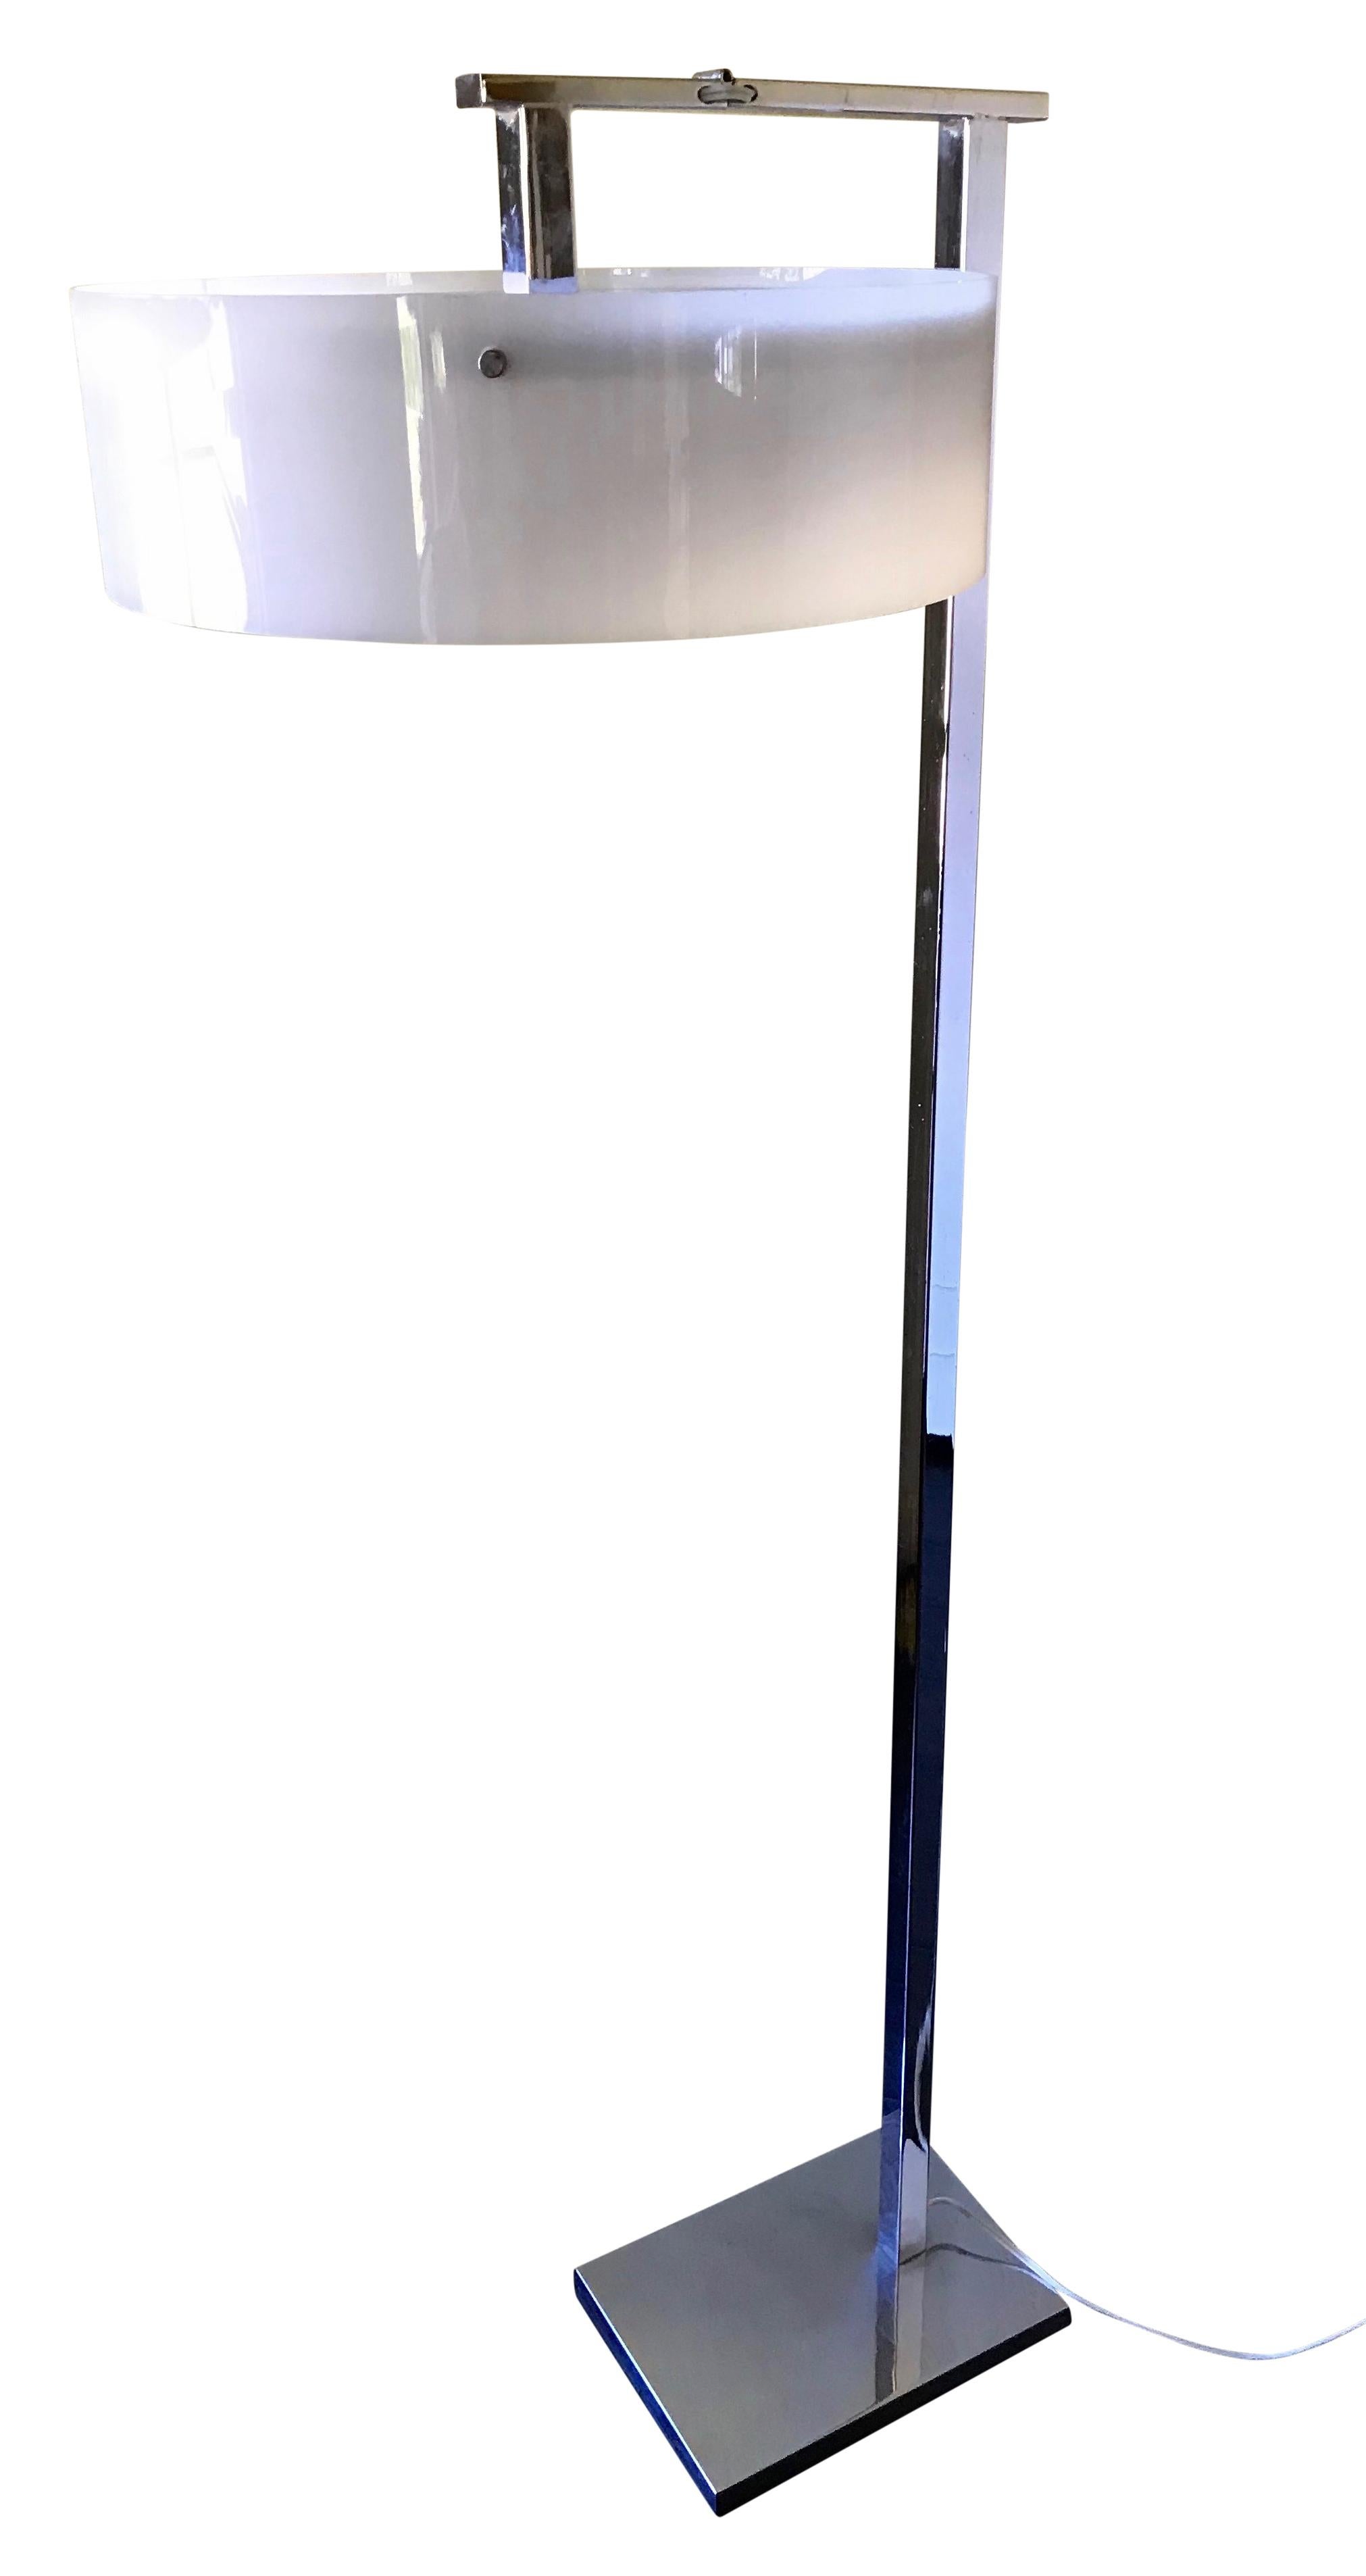 Kurt Versen style flip top convertible chrome floor lamp with original white acrylic shade.
Arm hinge flips up for a torchiere lamp and down for a reading lamp.
The switch is on a foot petal connected to the cord.
1960's-1970's mid-century
Recently